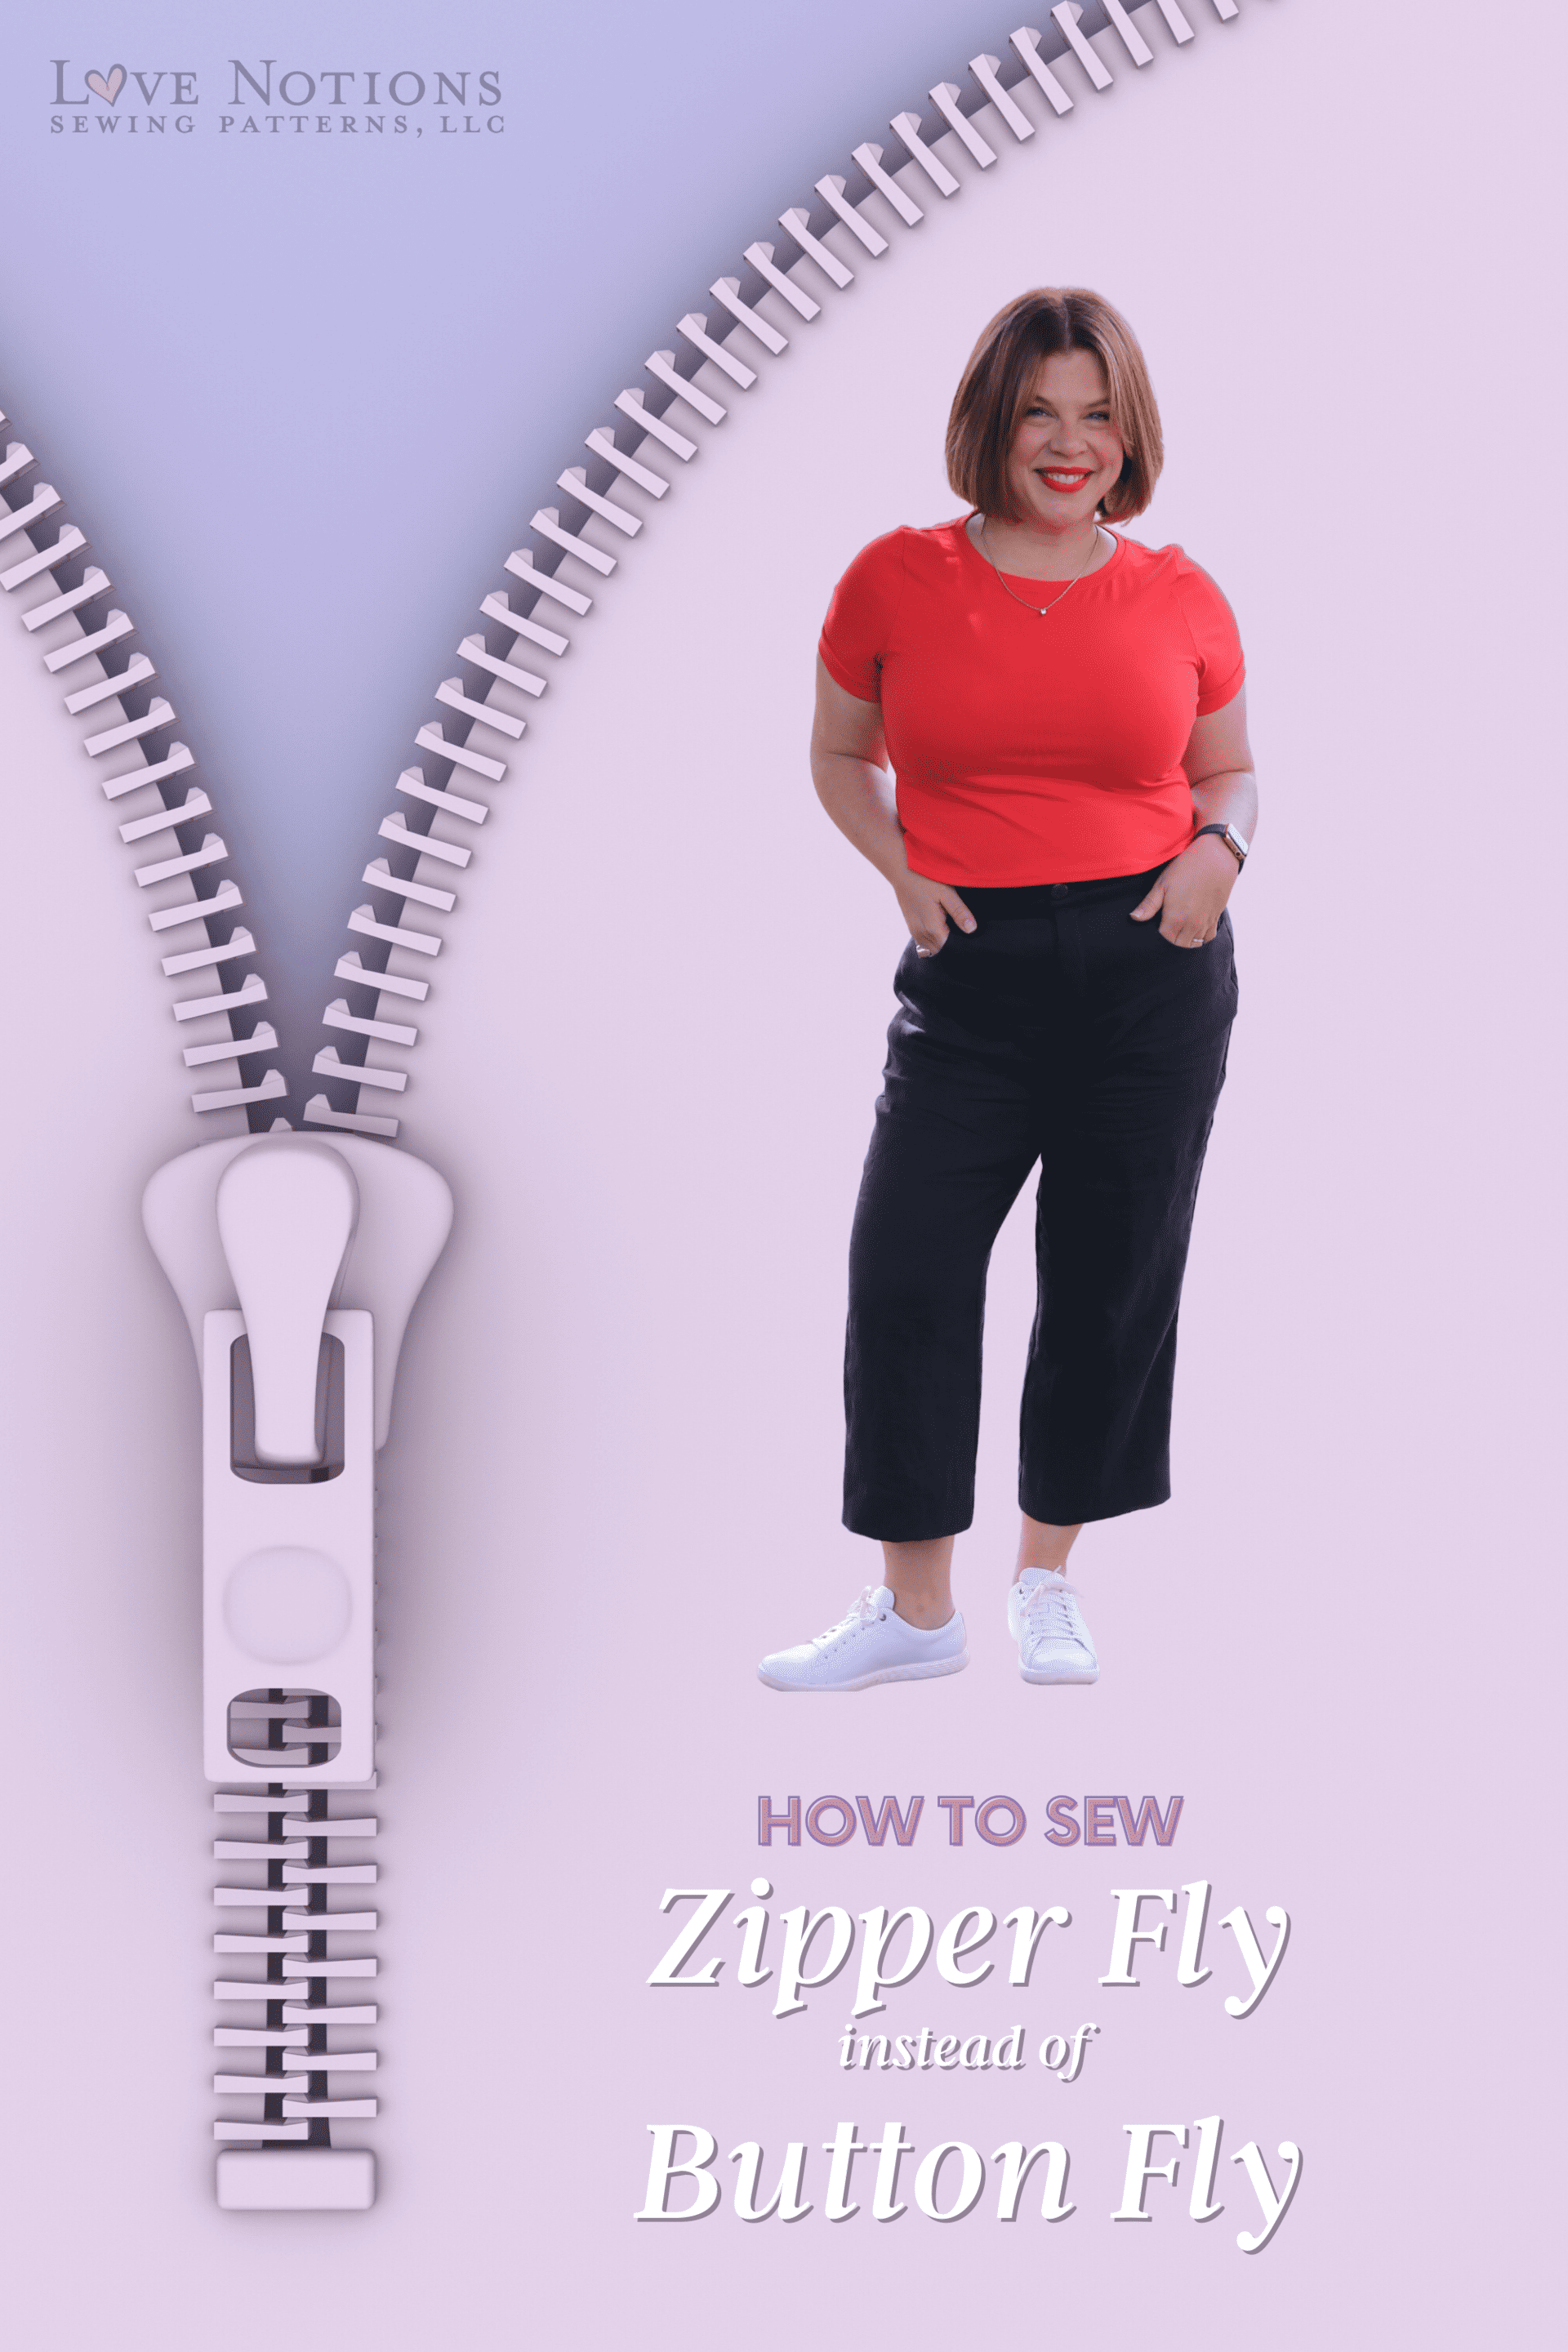 How to Sew a Zipper - Love Notions Sewing Patterns